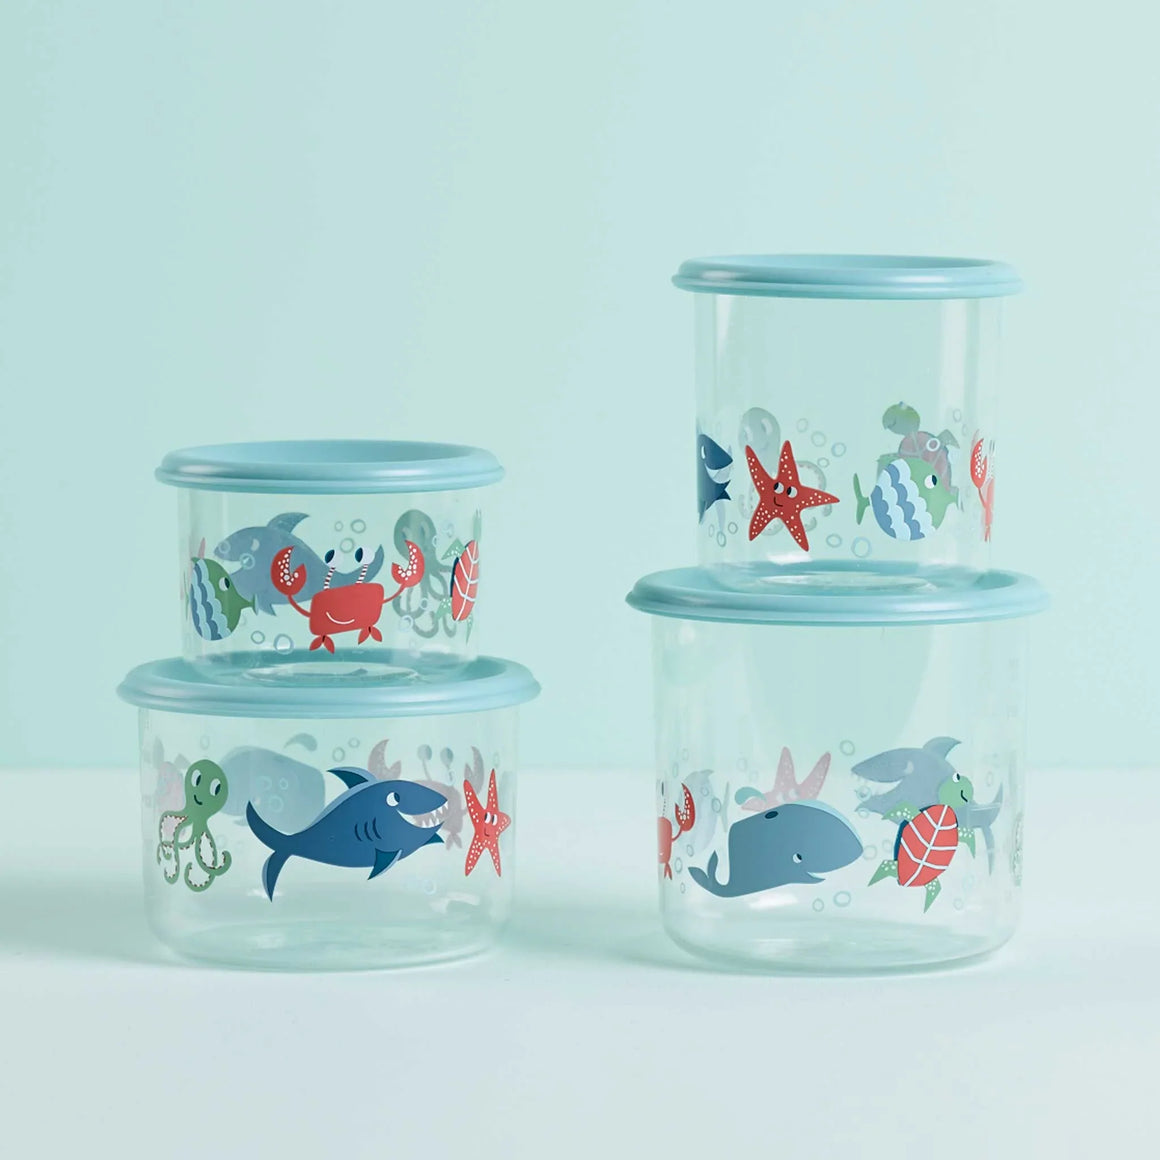 Ocean - Good Lunch Containers - Small 2 pcs.